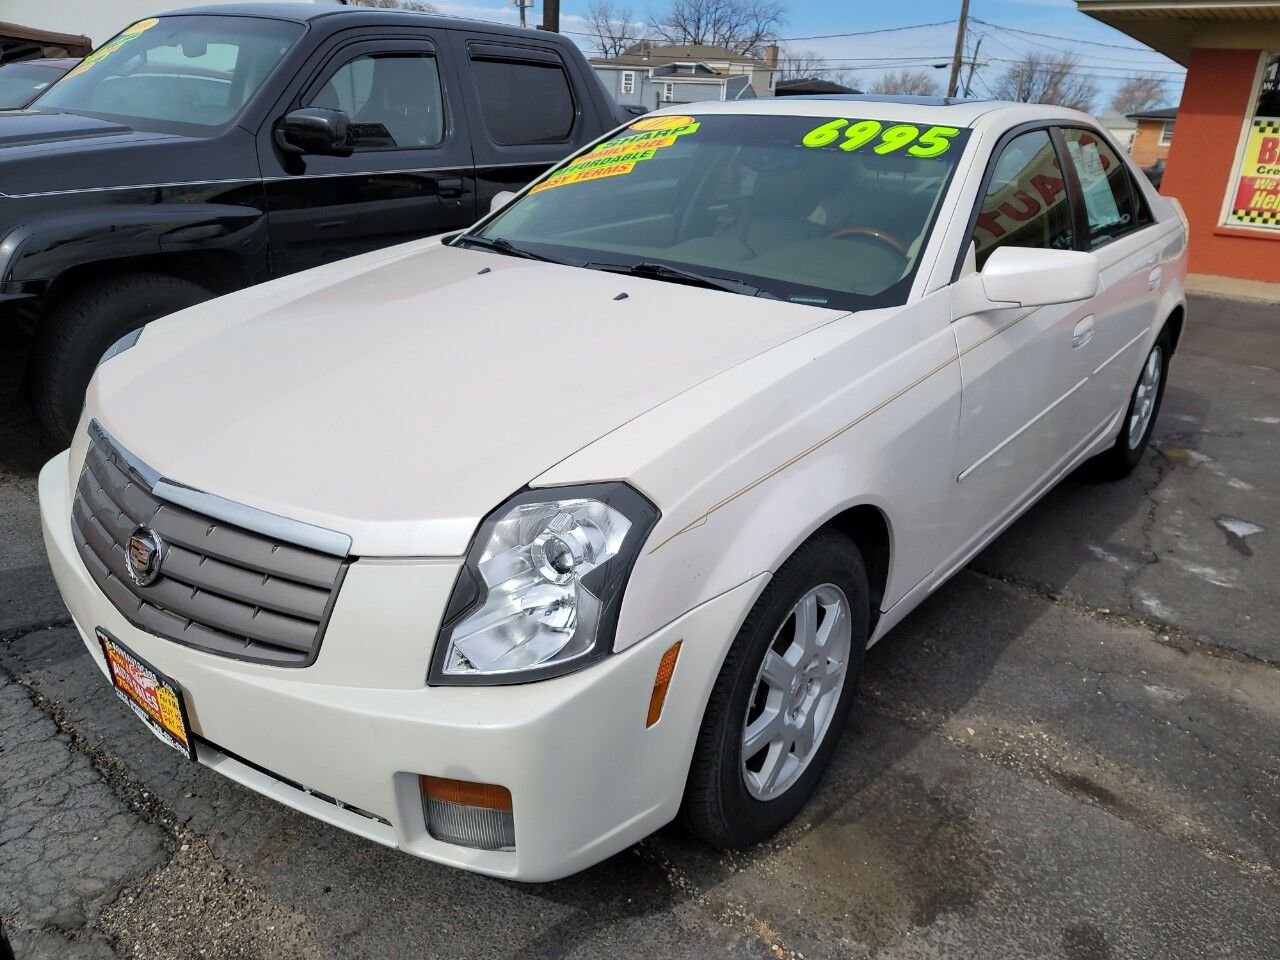 2007 Cadillac CTS For Sale - Carsforsale.com®